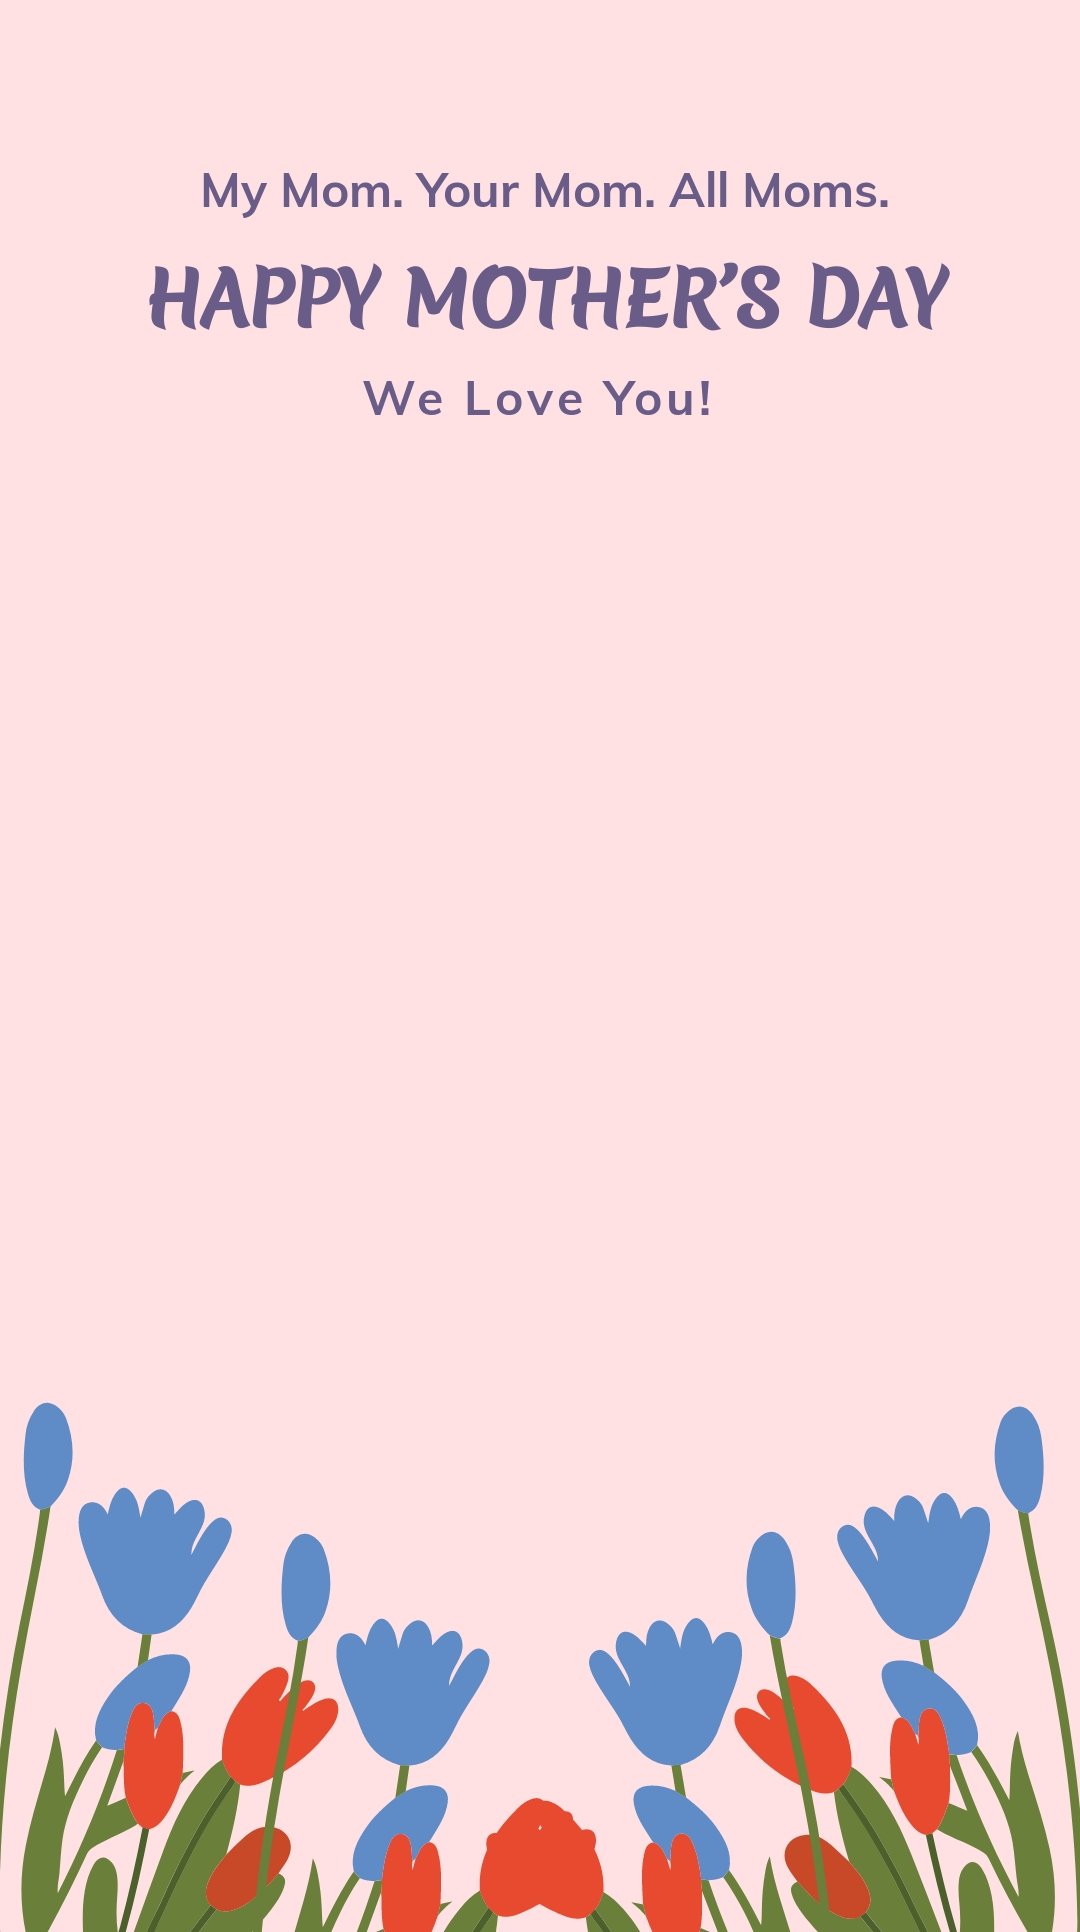 Happy Mother's Day Snapchat Geofilter Template